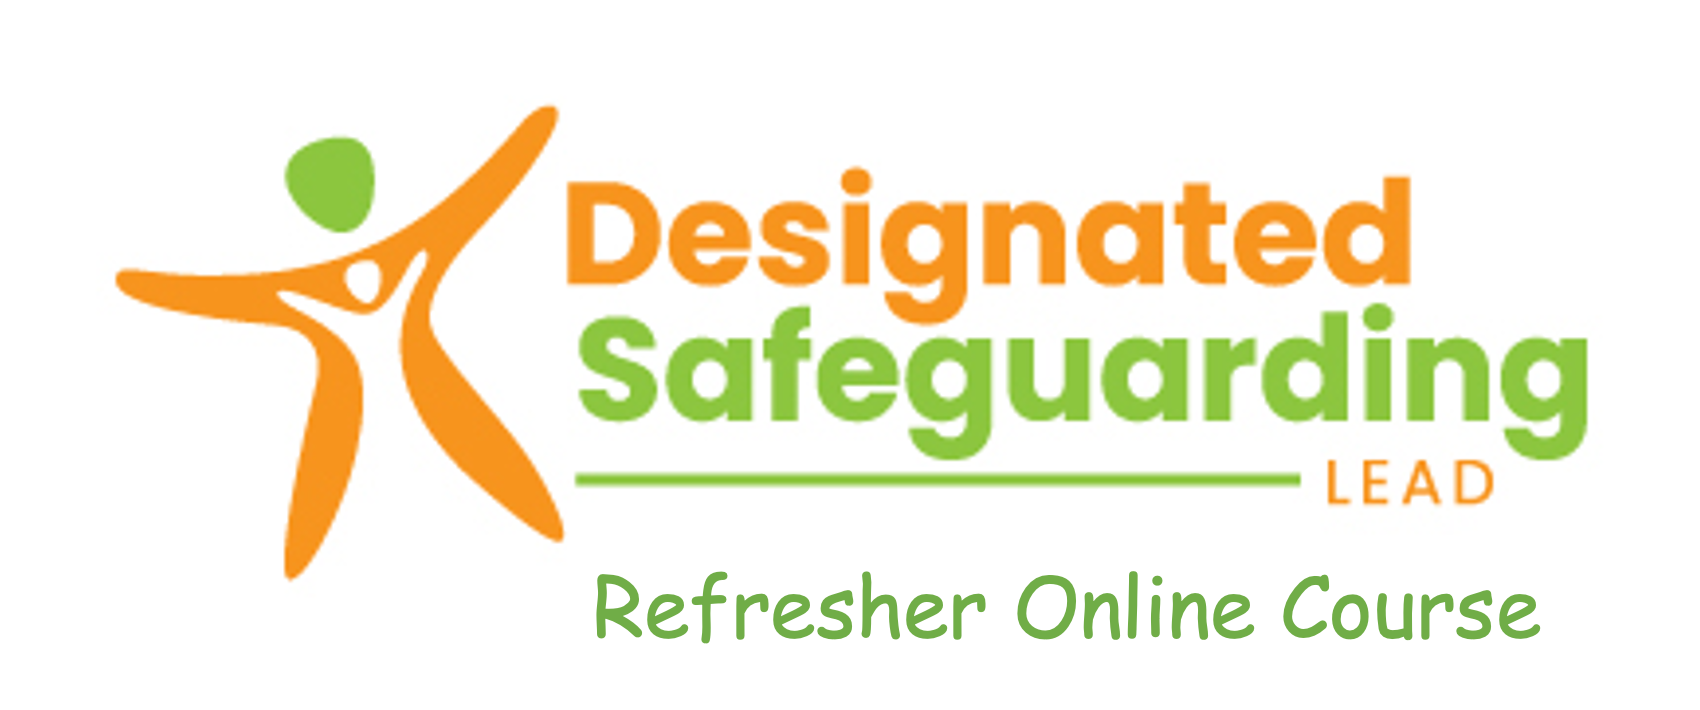 Designated Safeguarding Lead Refresher Online Course